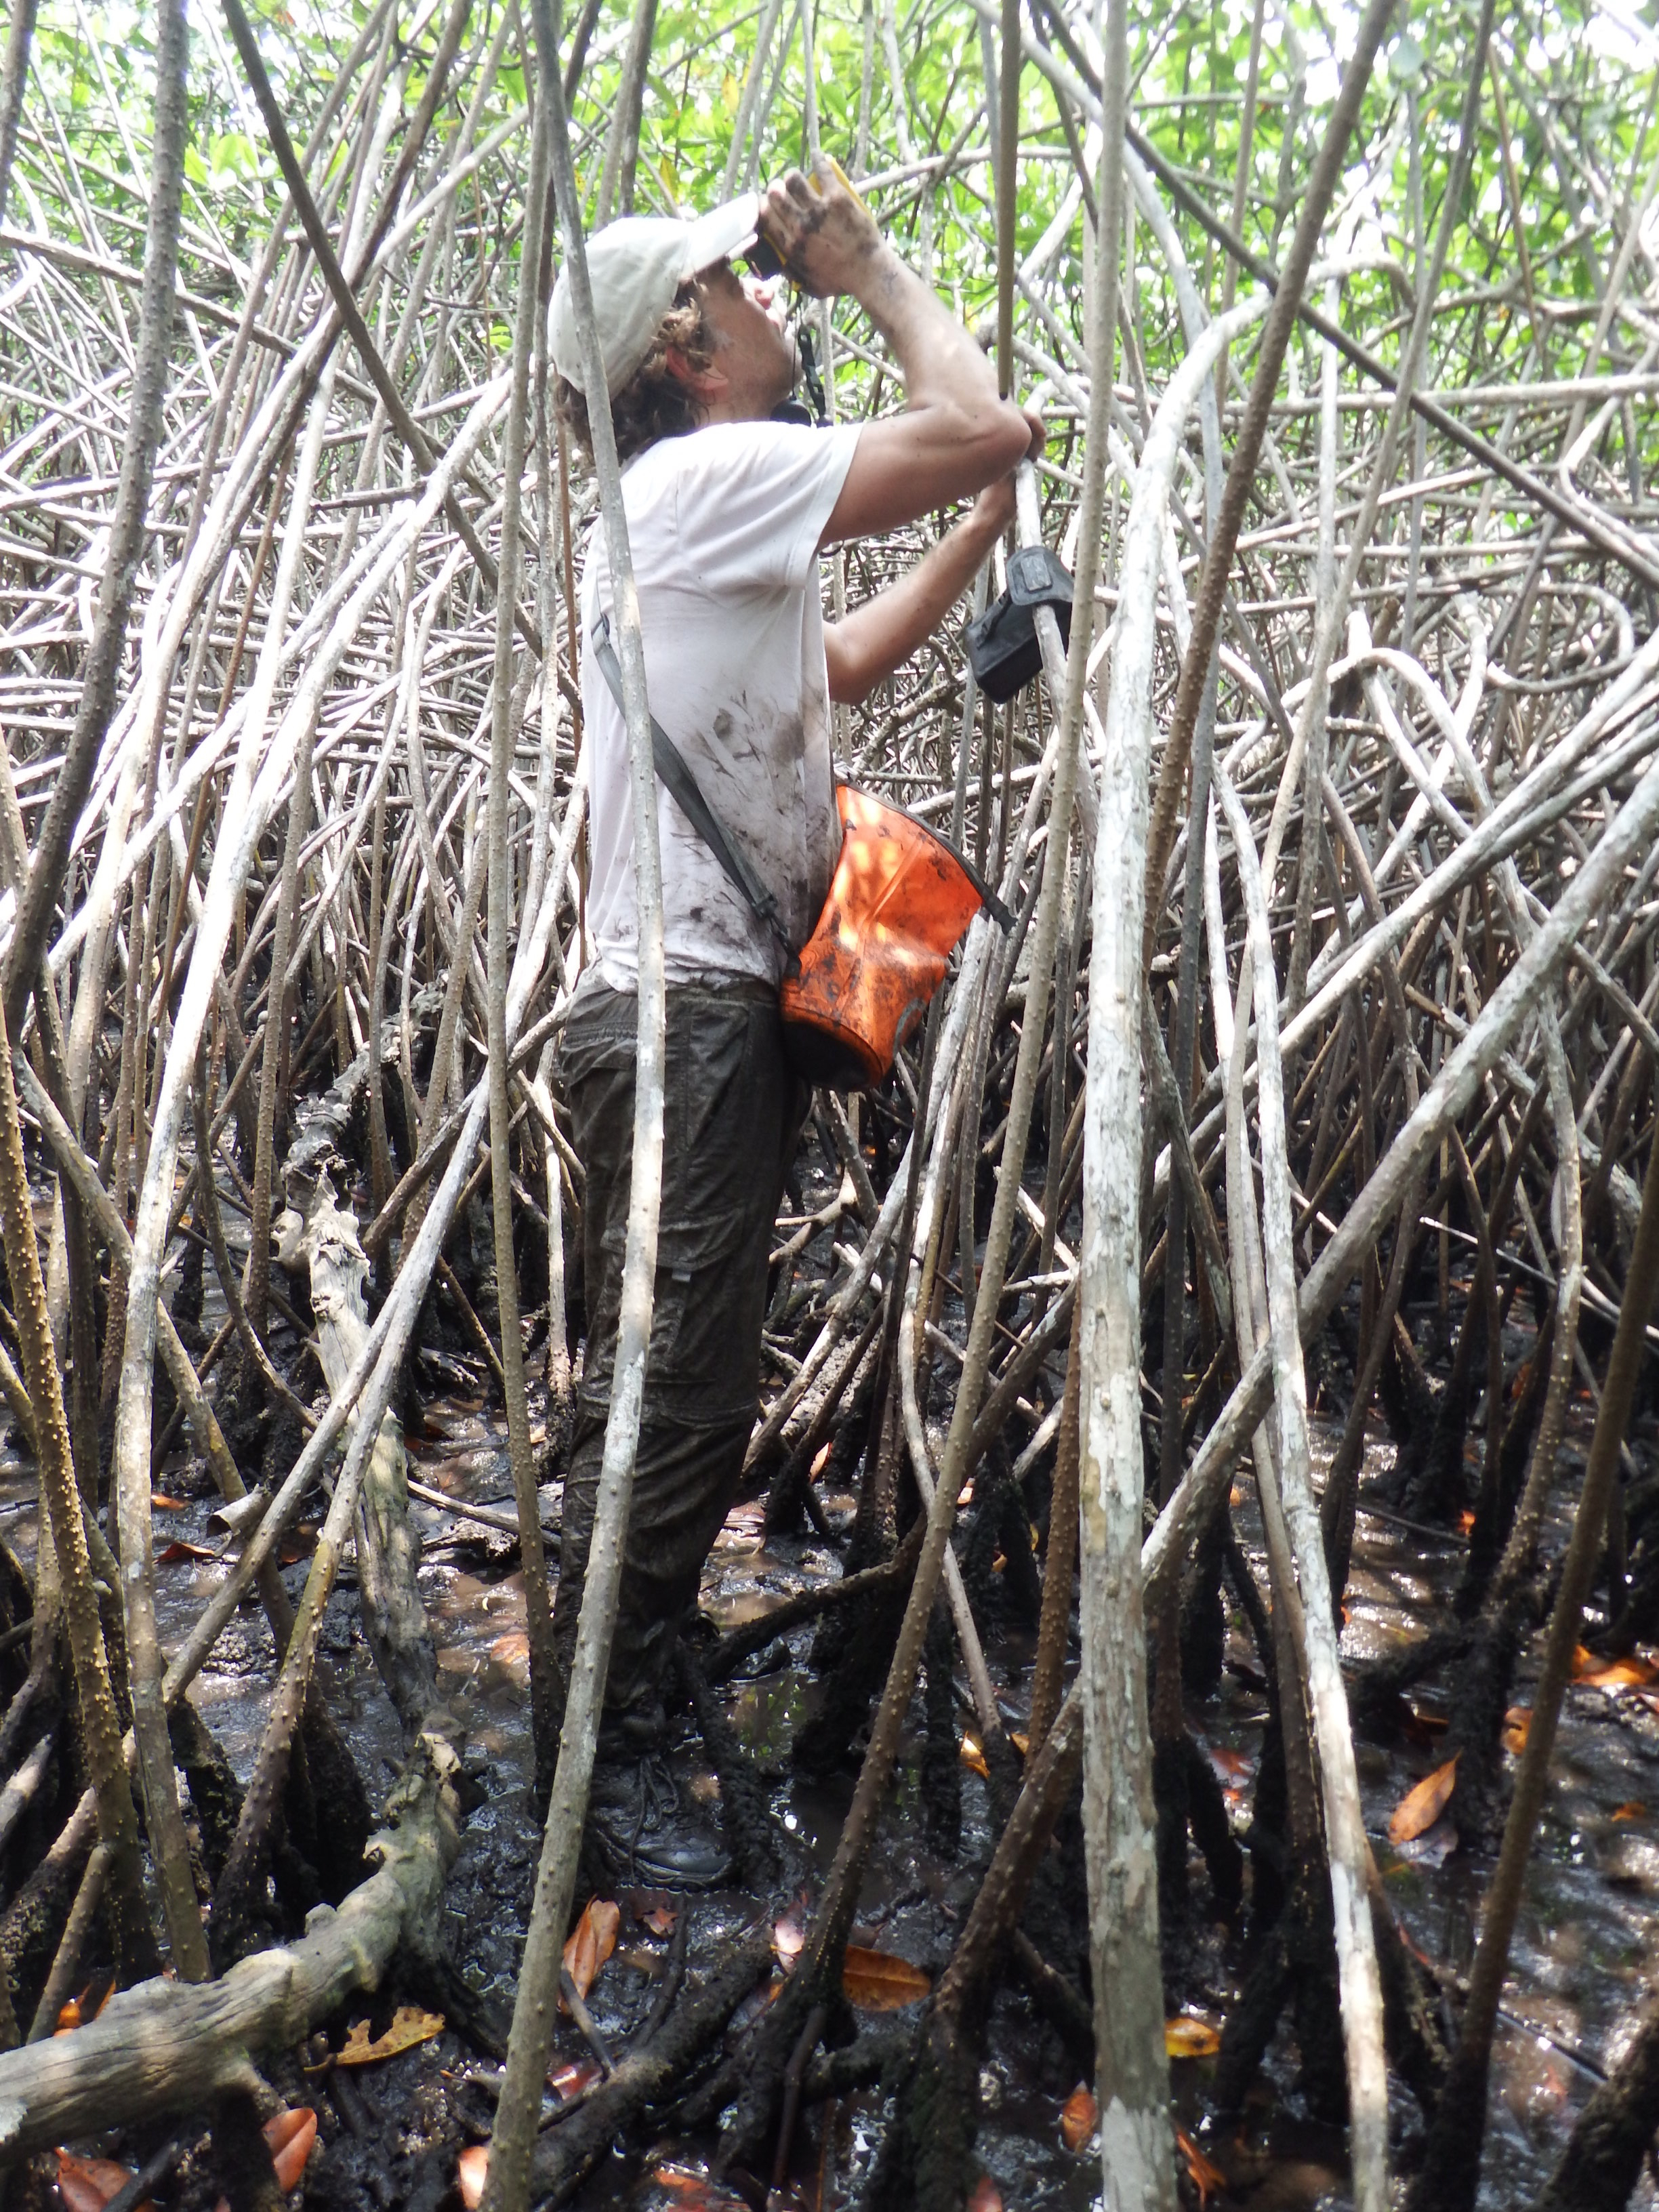 In the mangroves